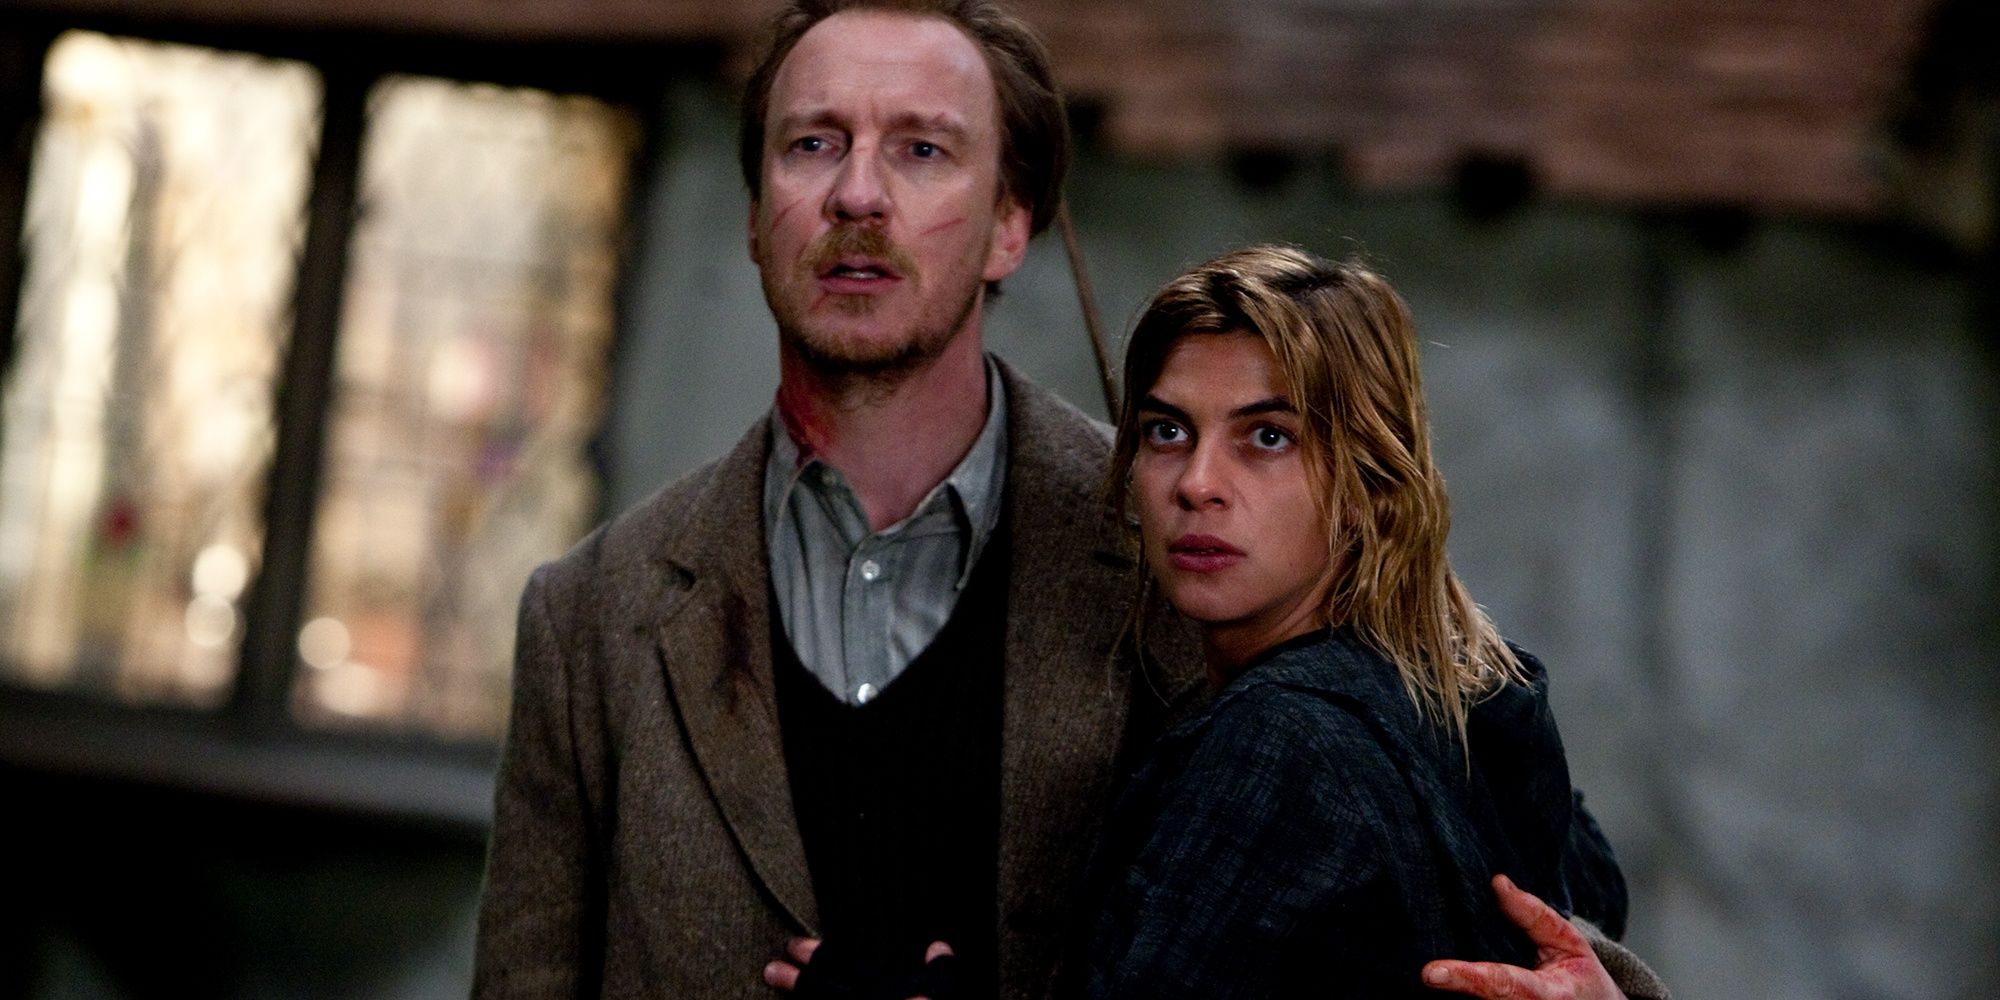 lupin and tonks stood outside the burrows in harry potter